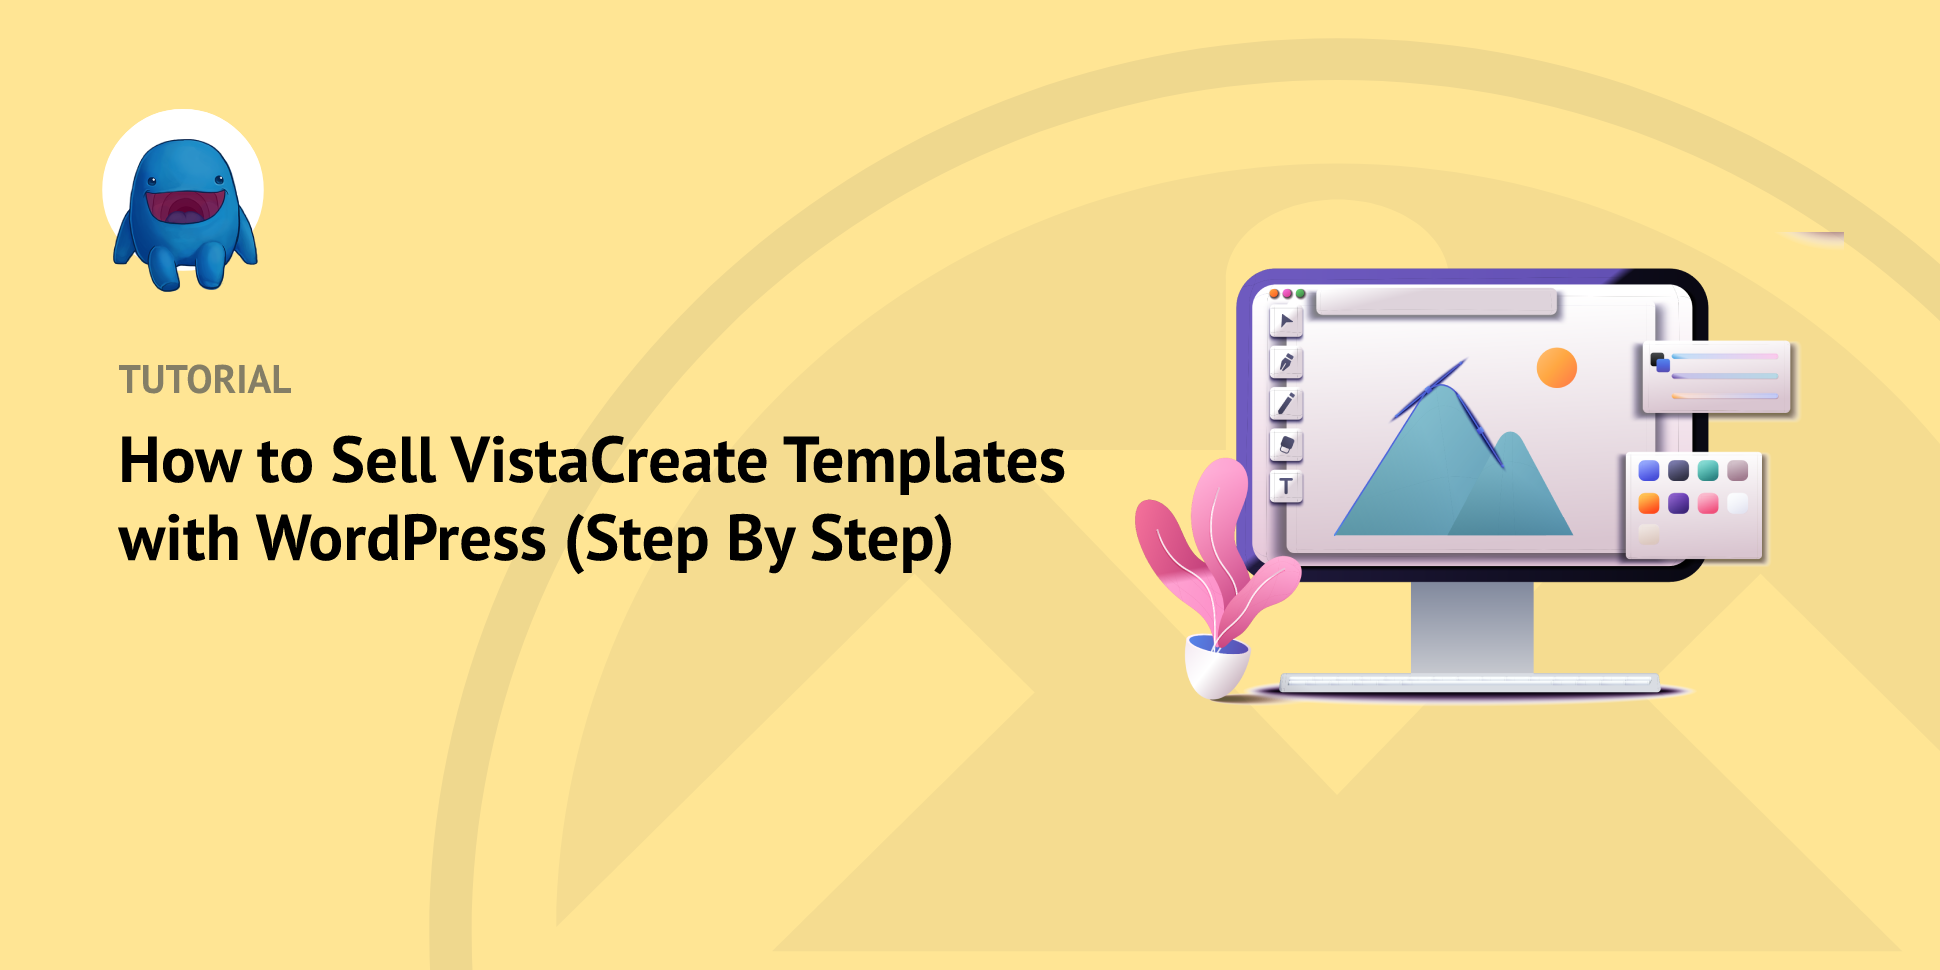 How to Sell VistaCreate Templates With WordPress